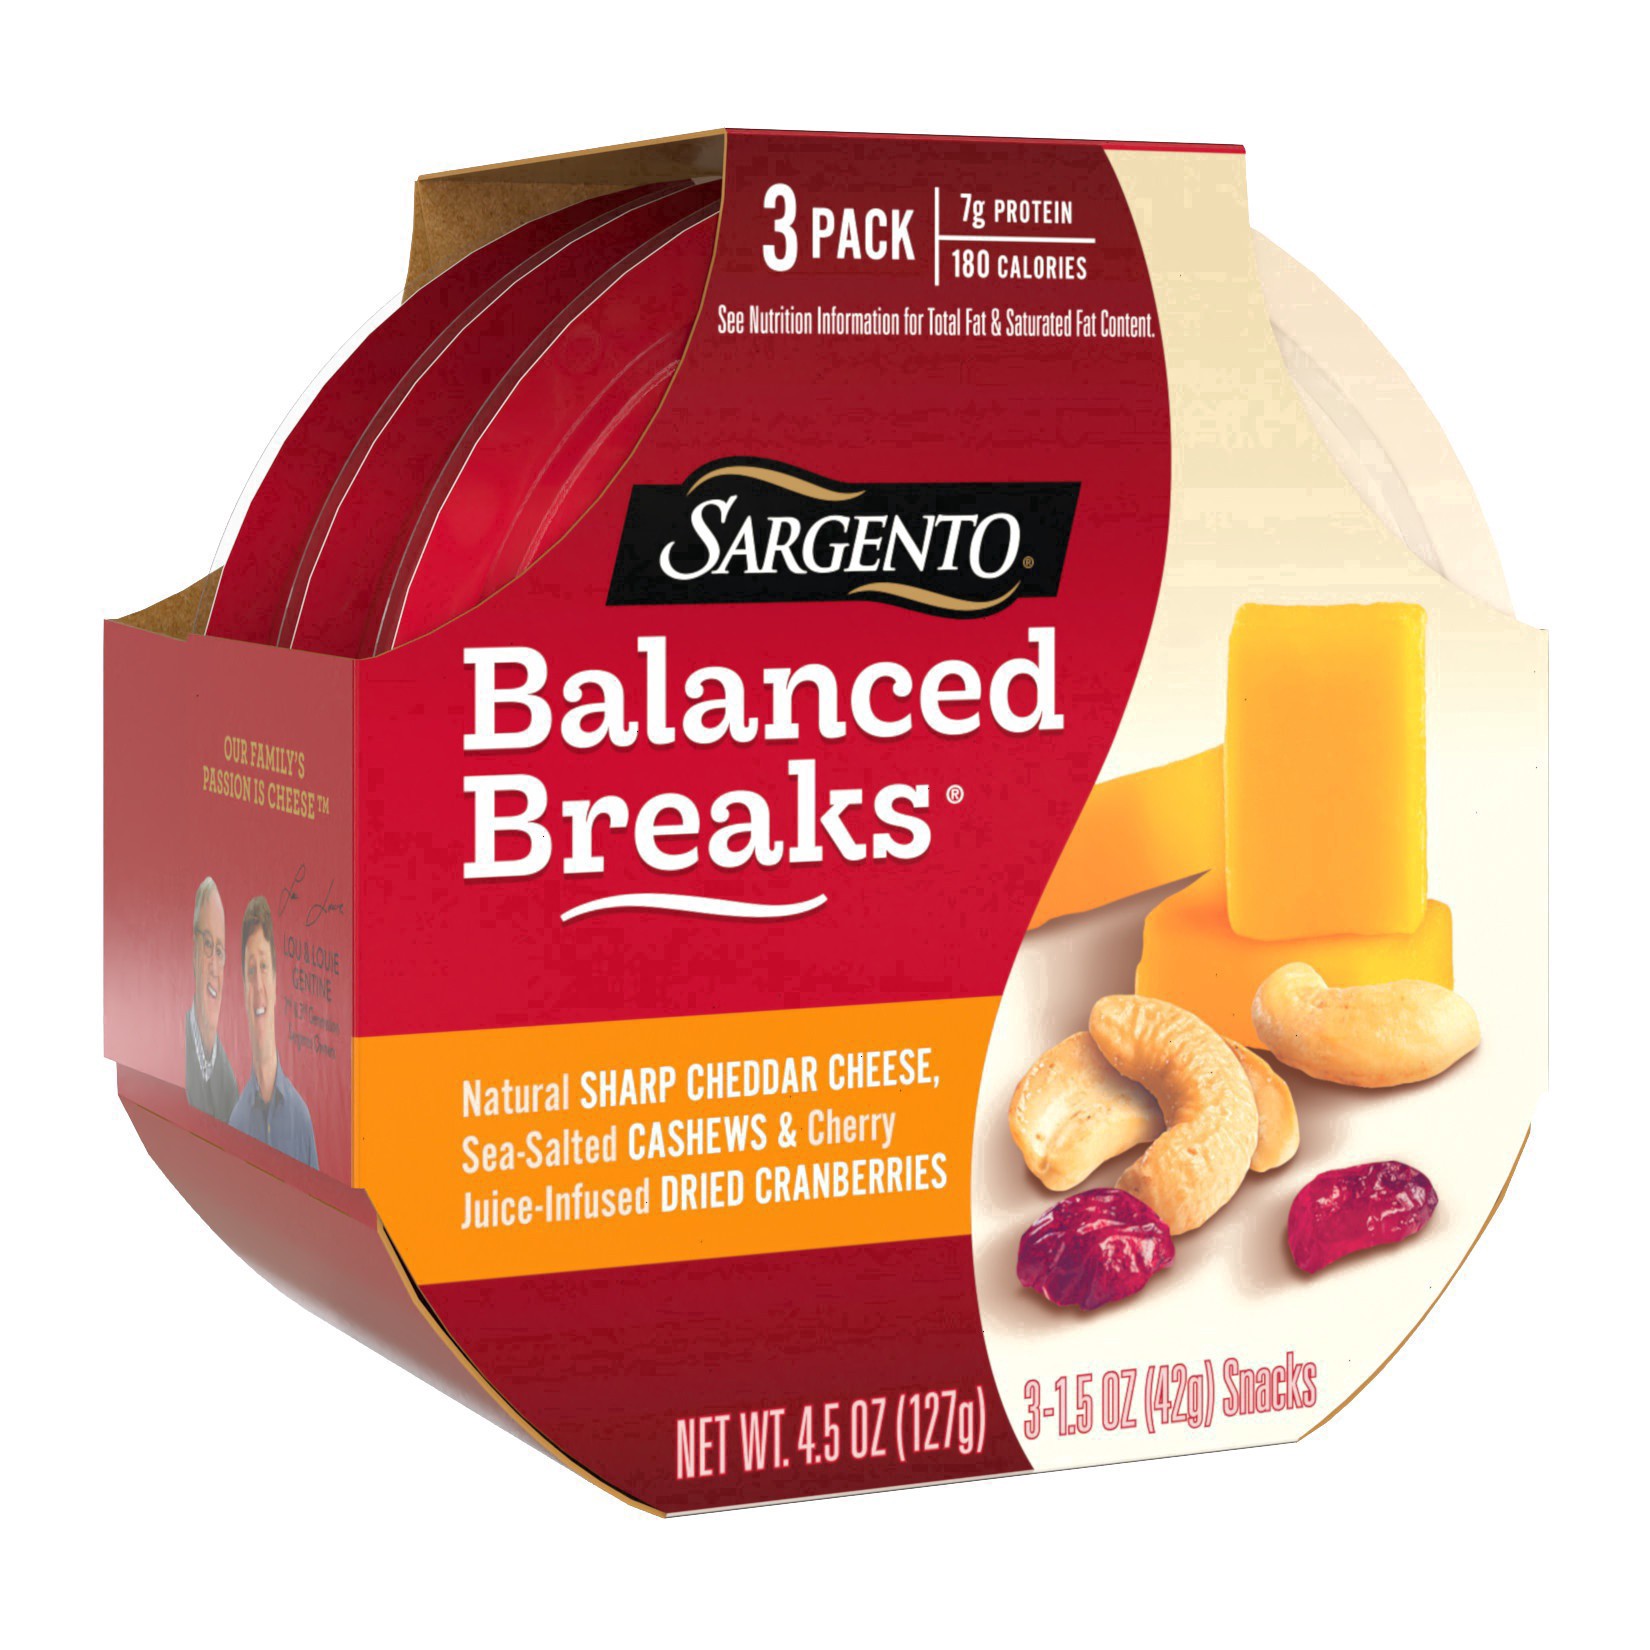 slide 32 of 34, Sargento Balanced Breaks with Natural Sharp Cheddar Cheese, Sea-Salted Cashews and Cherry Juice-Infused Dried Cranberries, 1.5 oz., 3-Pack, 3 ct